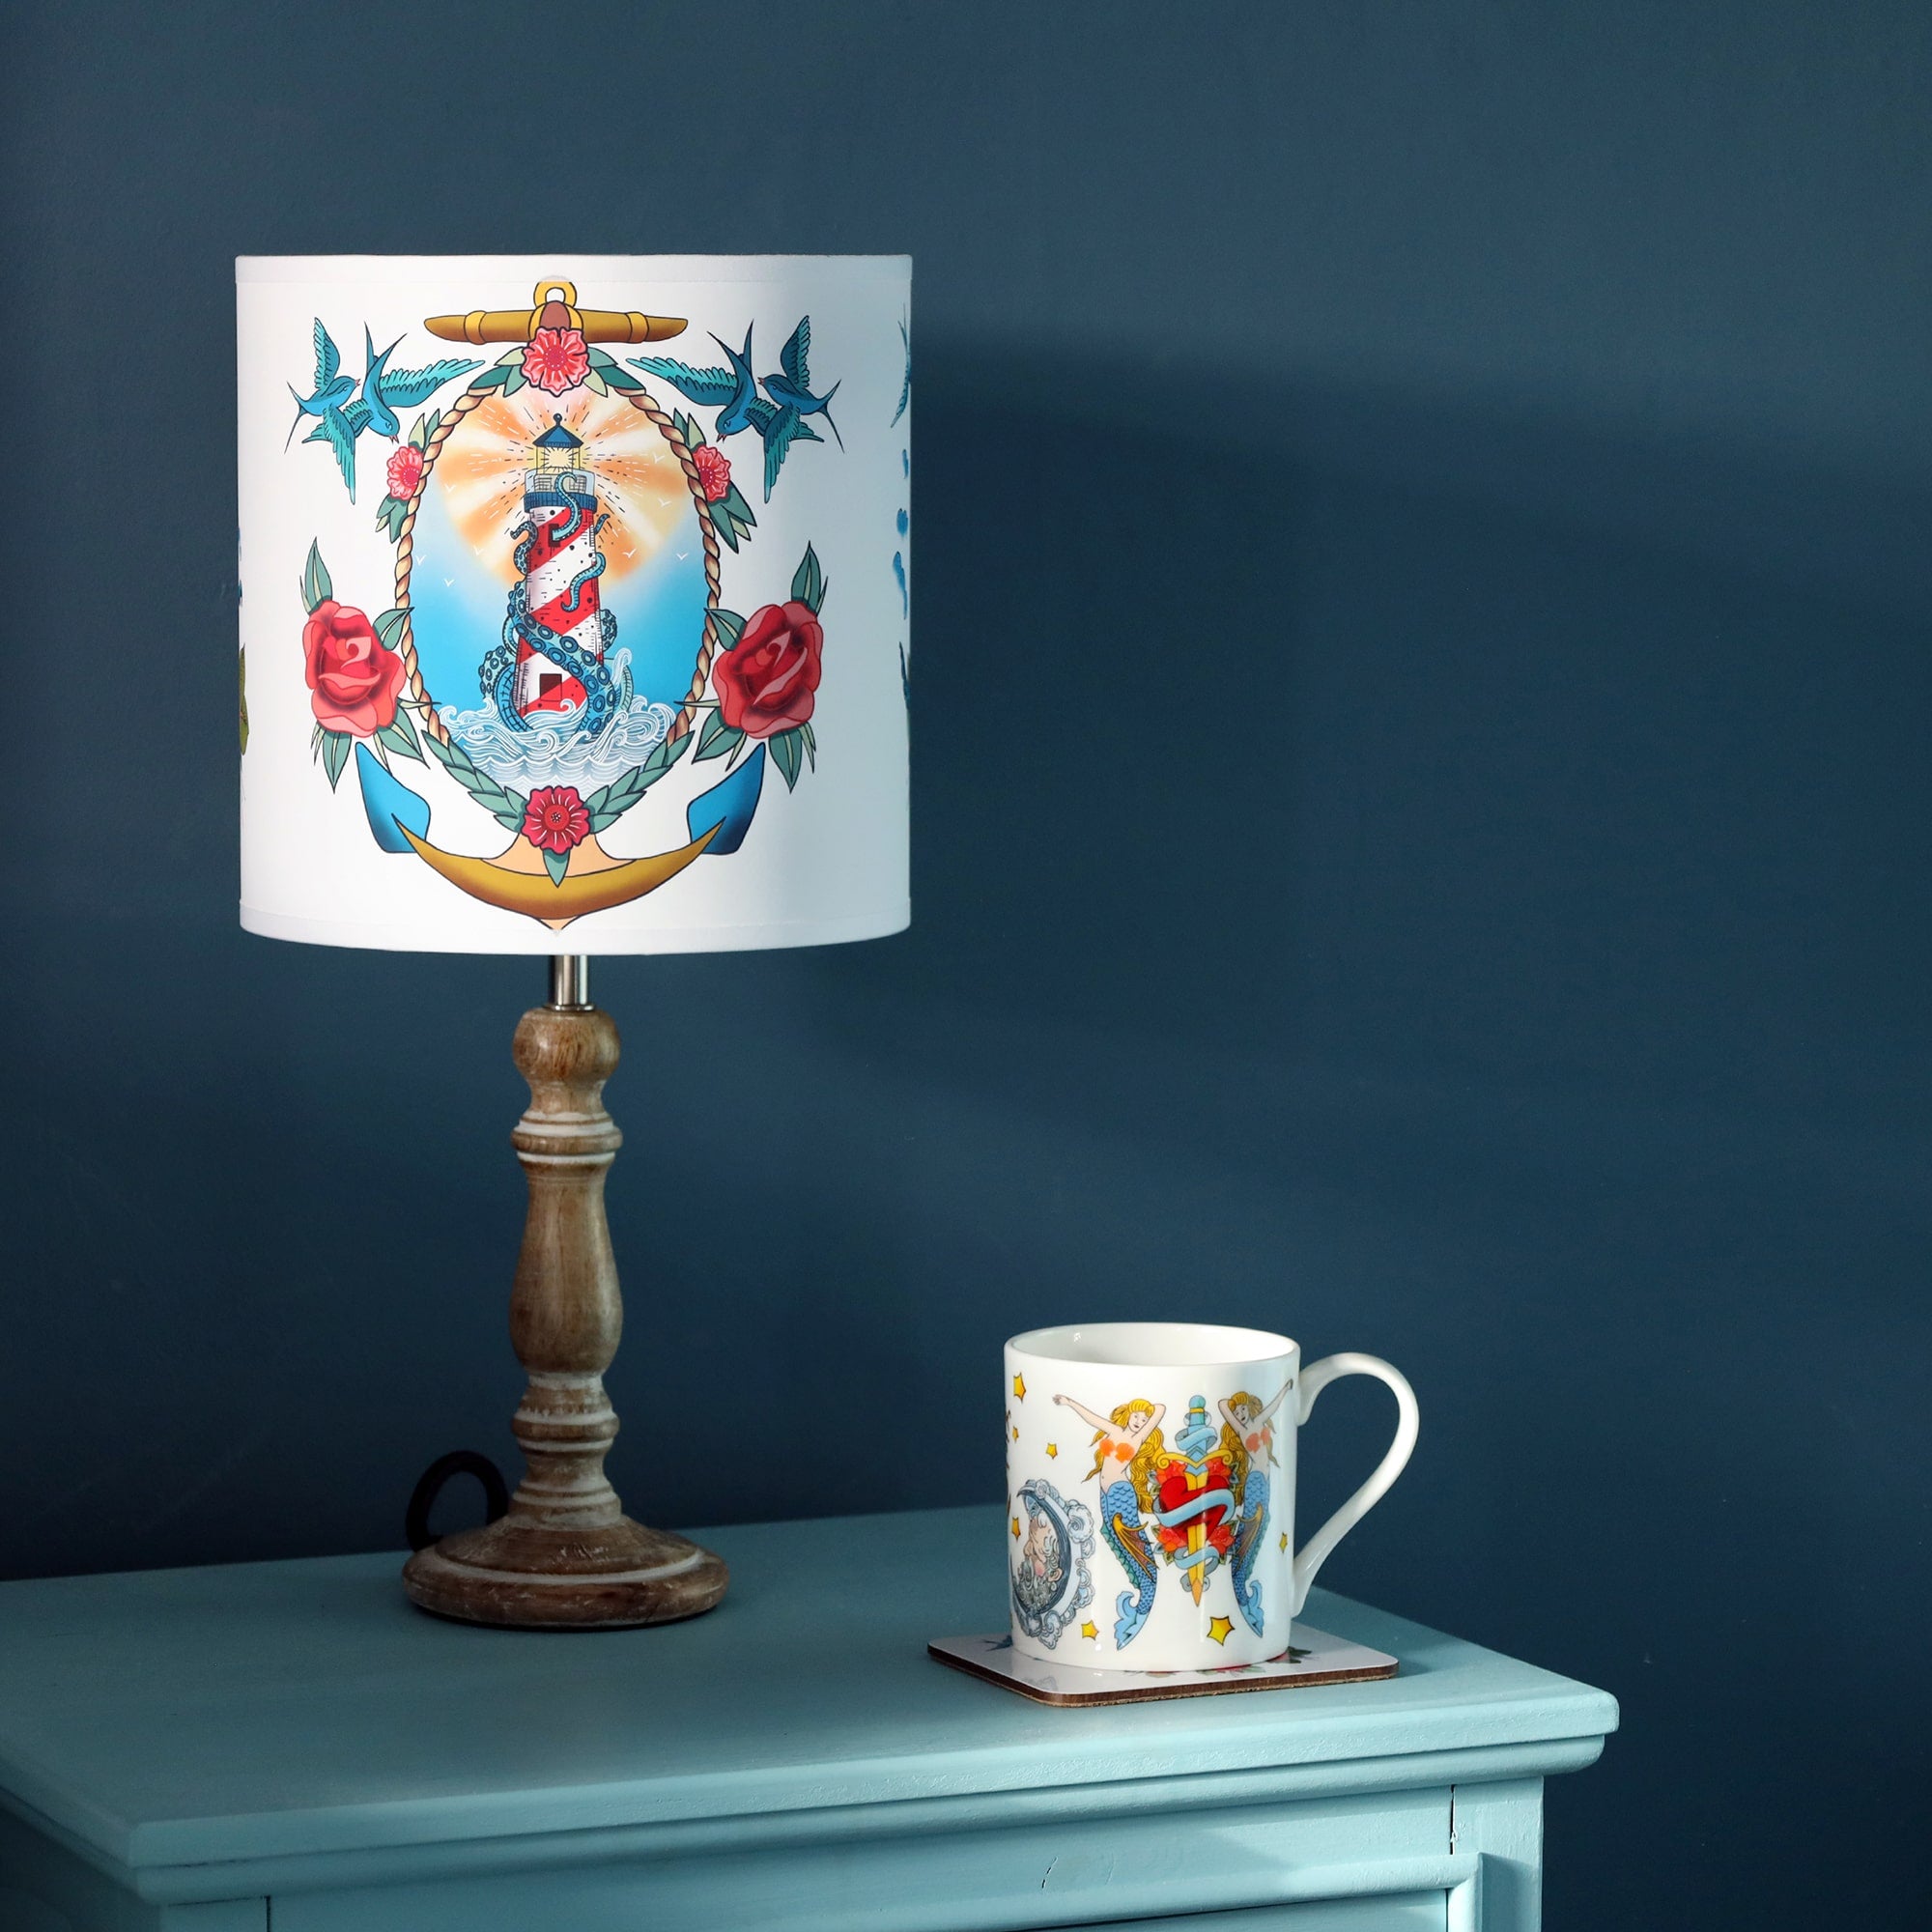 Small pixie whitewashed wooden lamp base with tattoo inspired lampshade with lighthouse and kraken design, with a mug with mermaids, heart and daggers design on the blue cabinet as well. All this is set against a dark denim blue wall.